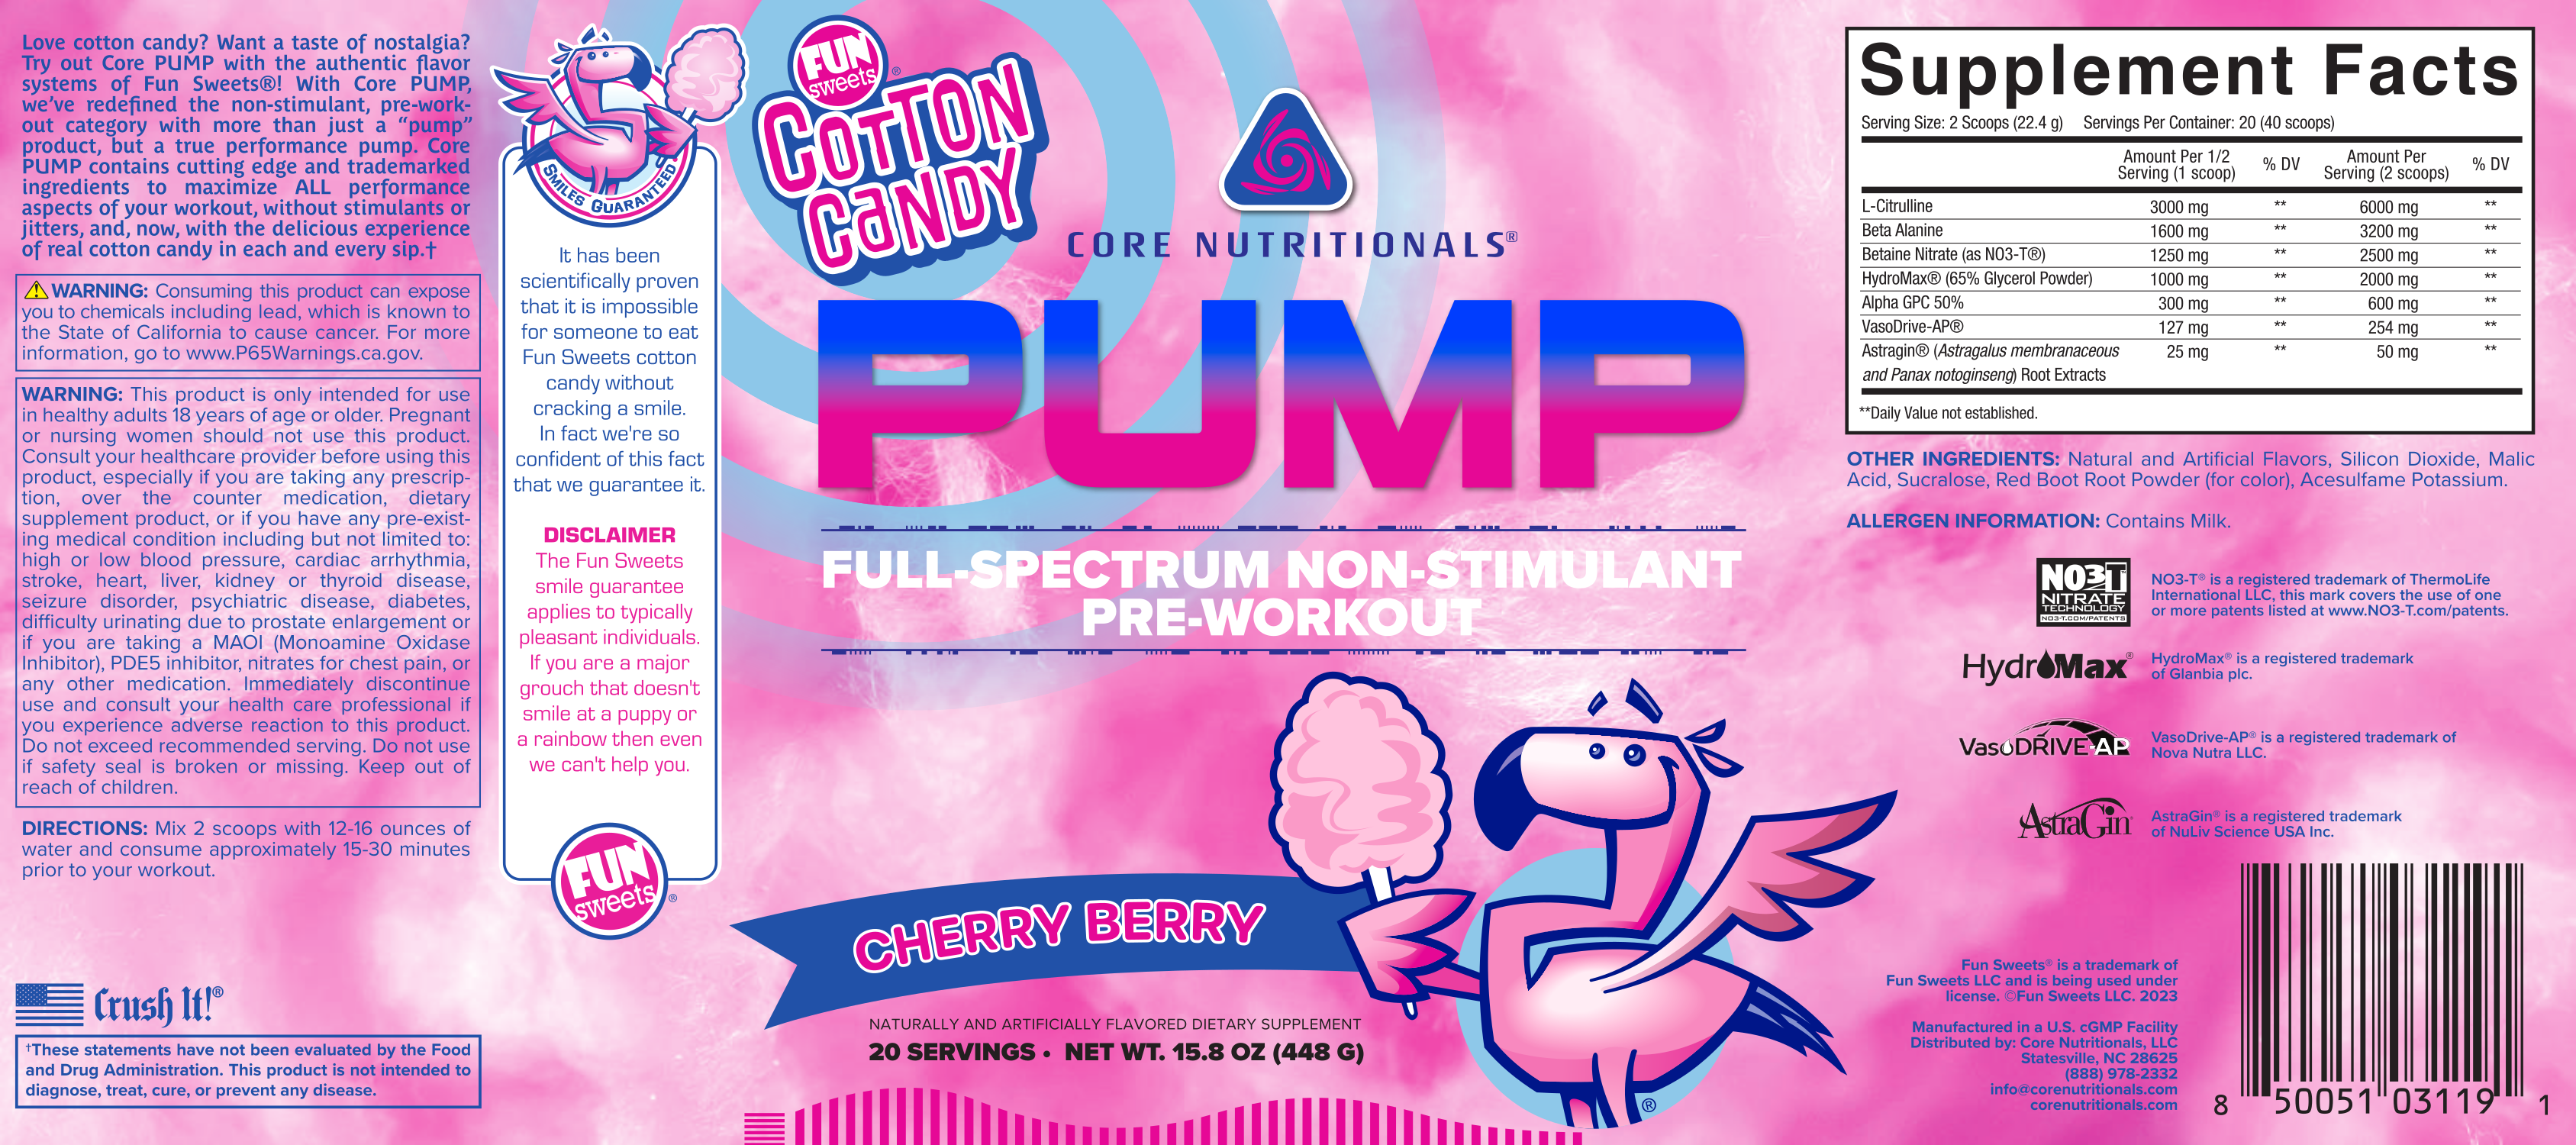 Core PUMP Fun Sweets Cotton Candy Cherry Berry Label